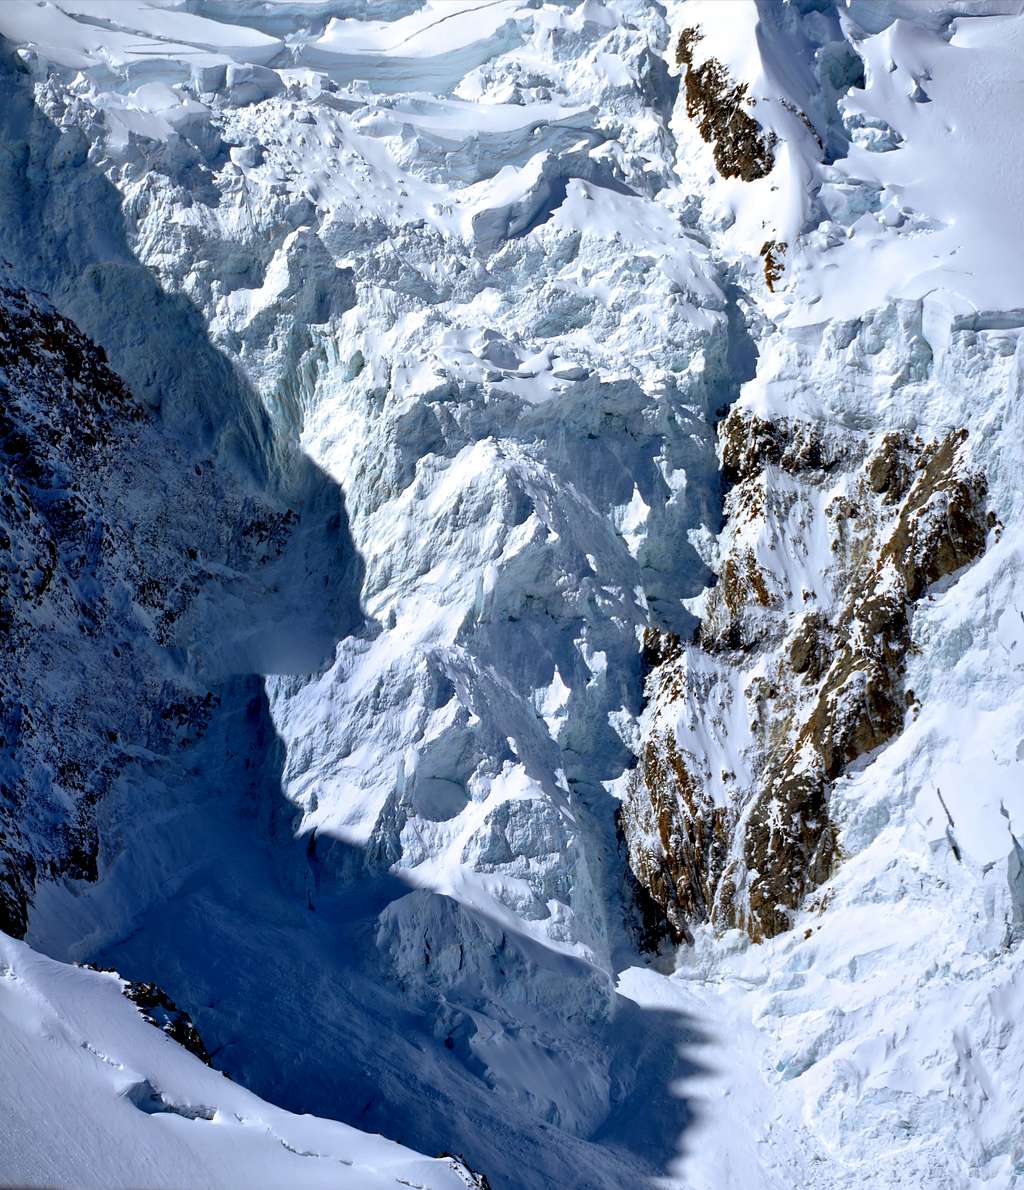 Icefall (Monte Bianco)